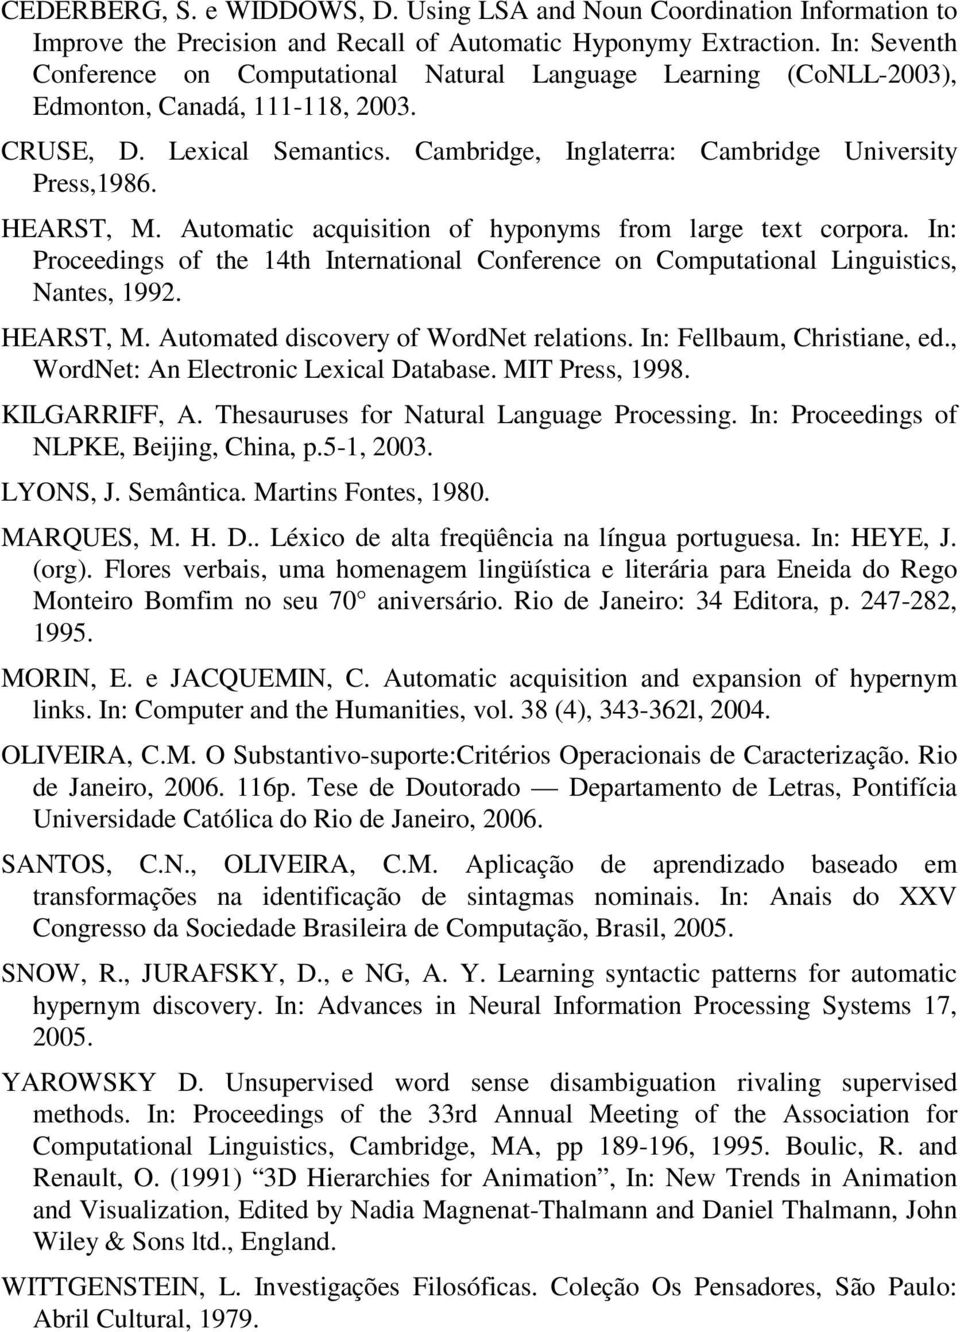 HEARST, M. Automatic acquisition of hyponyms from large text corpora. In: Proceedings of the 14th International Conference on Computational Linguistics, Nantes, 1992. HEARST, M.